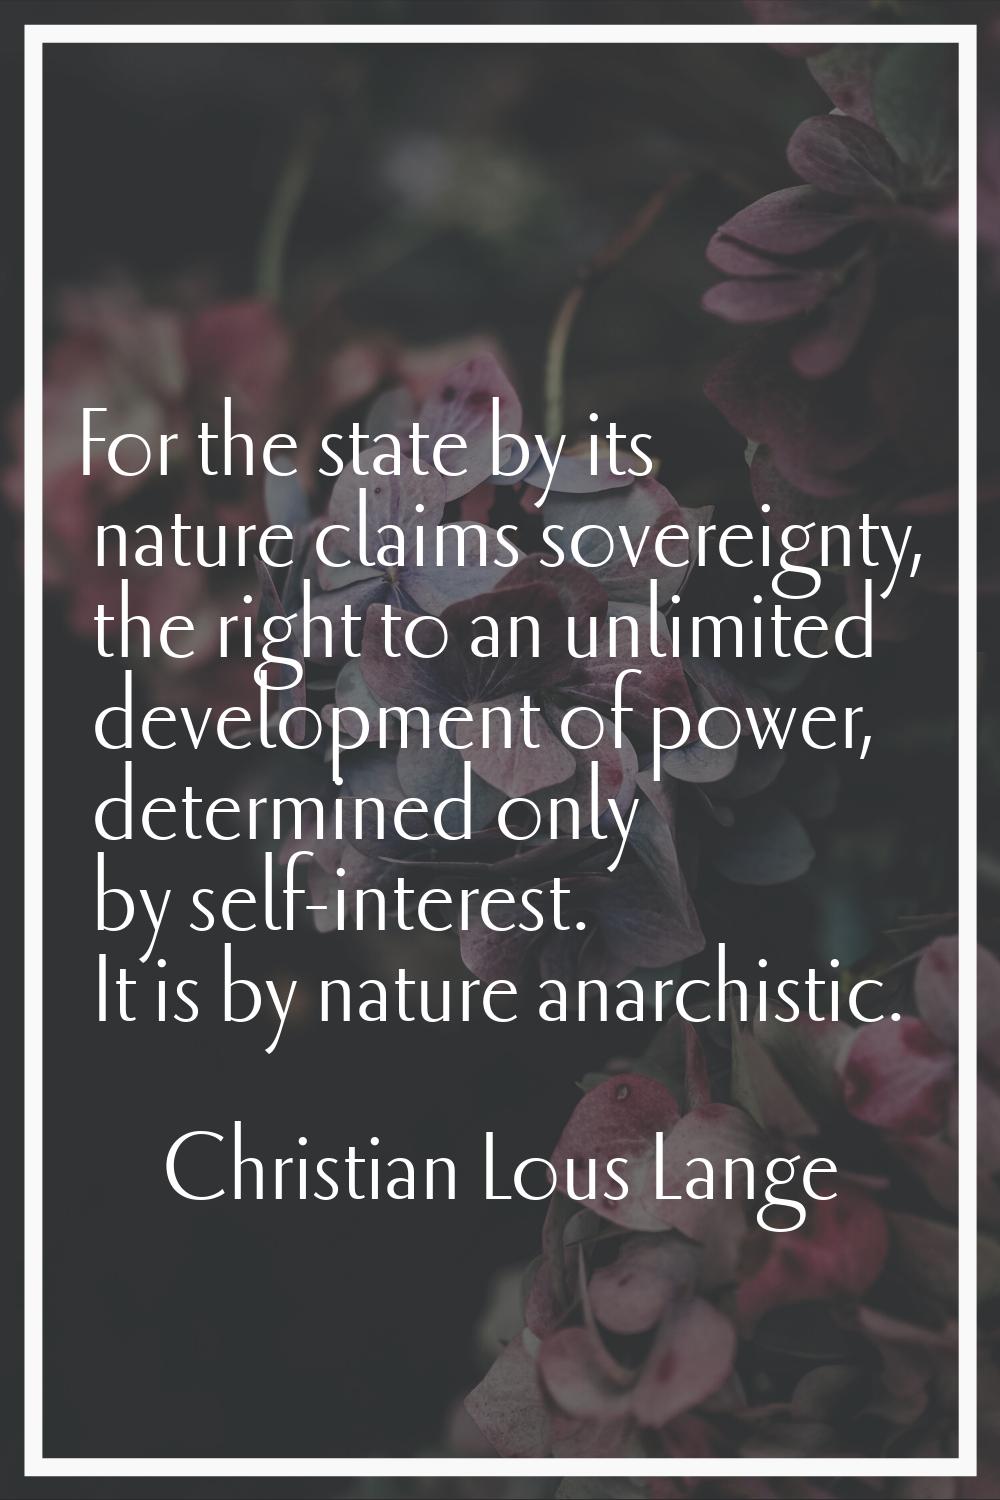 For the state by its nature claims sovereignty, the right to an unlimited development of power, det